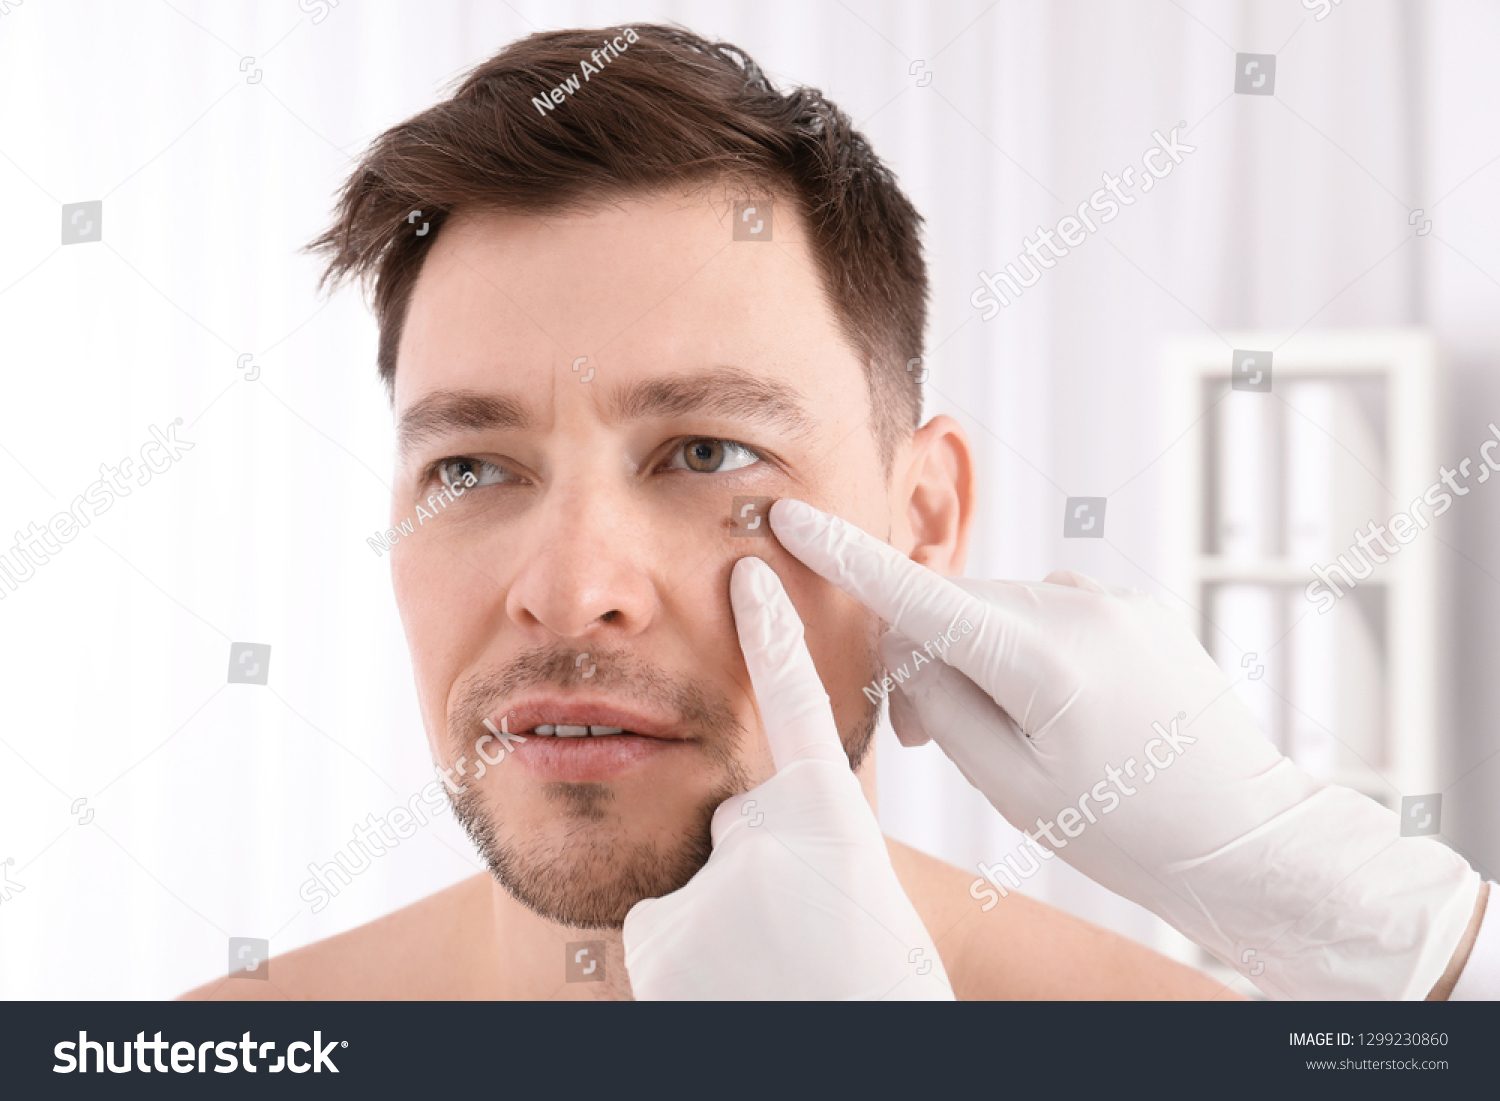 Doctor Examining Patient Clinic Visiting Dermatologist Stock Photo 1299230860 Shutterstock